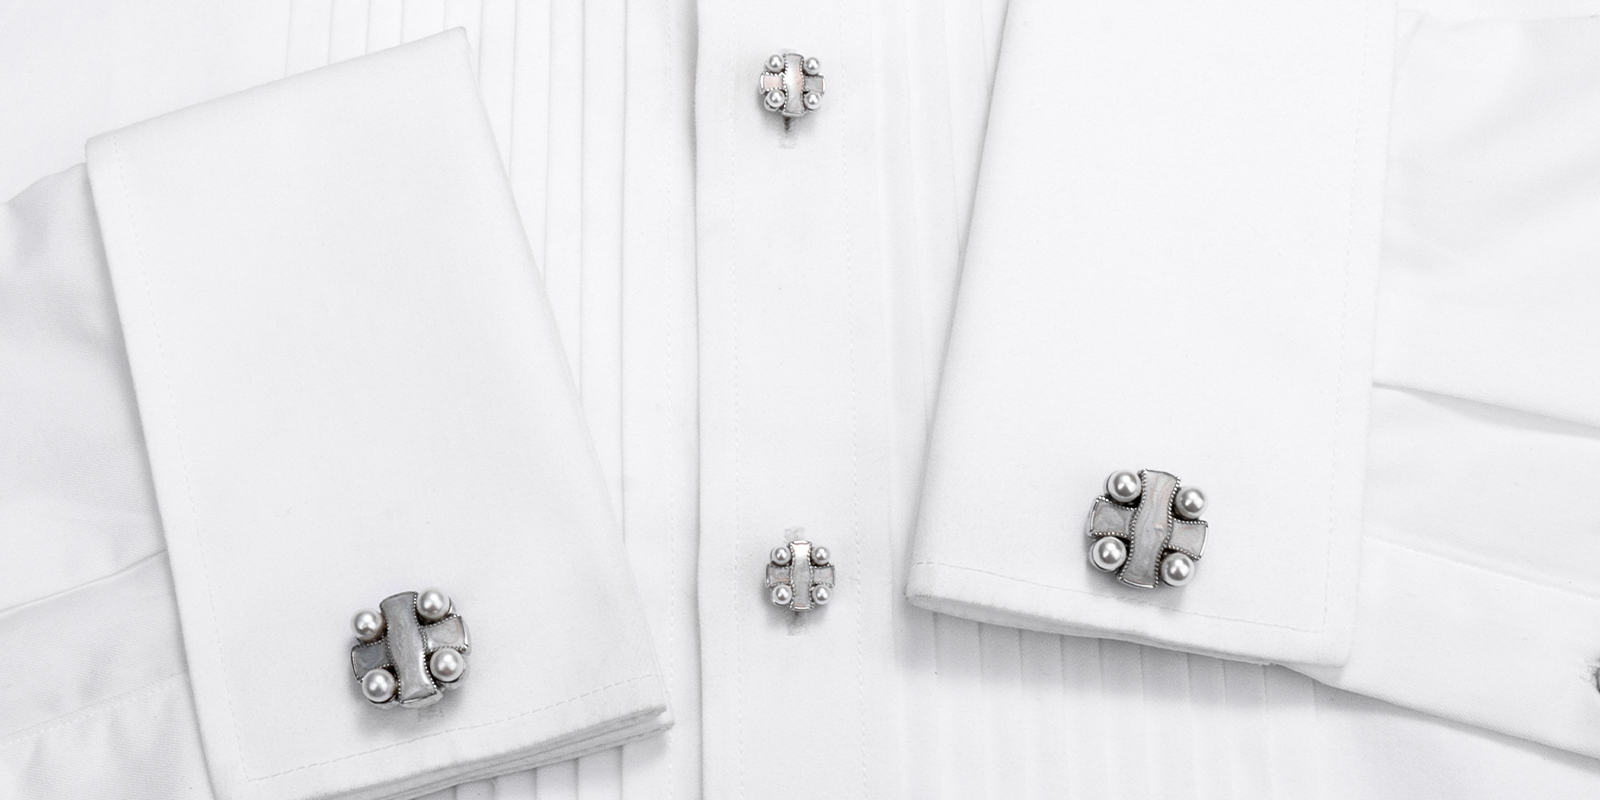 How Can Artificial Pearl Cufflinks Be Made More Elegant And Versatile?